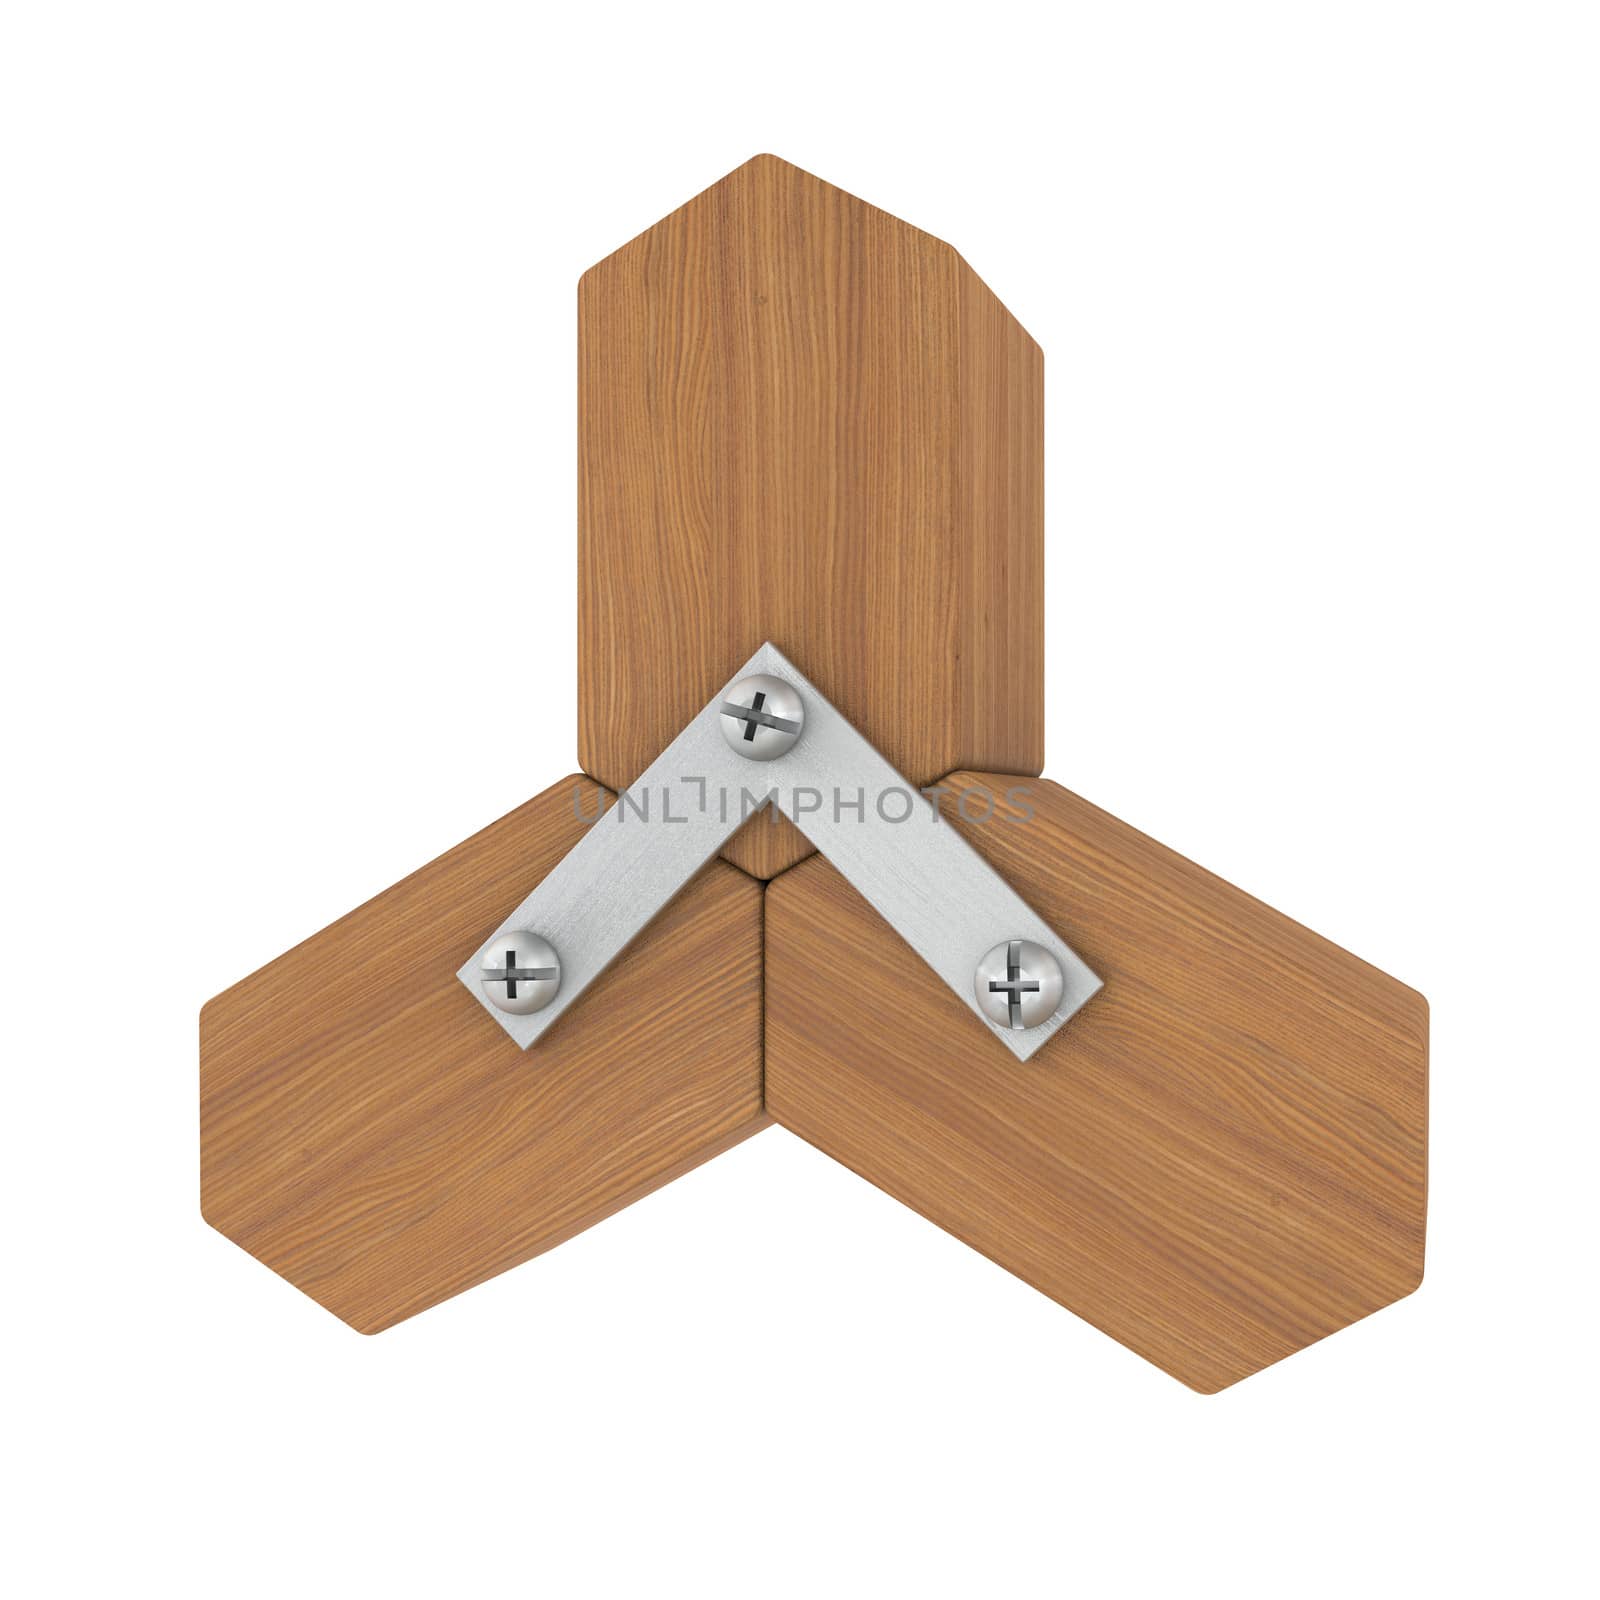 Wooden star. Isolated render on a white background